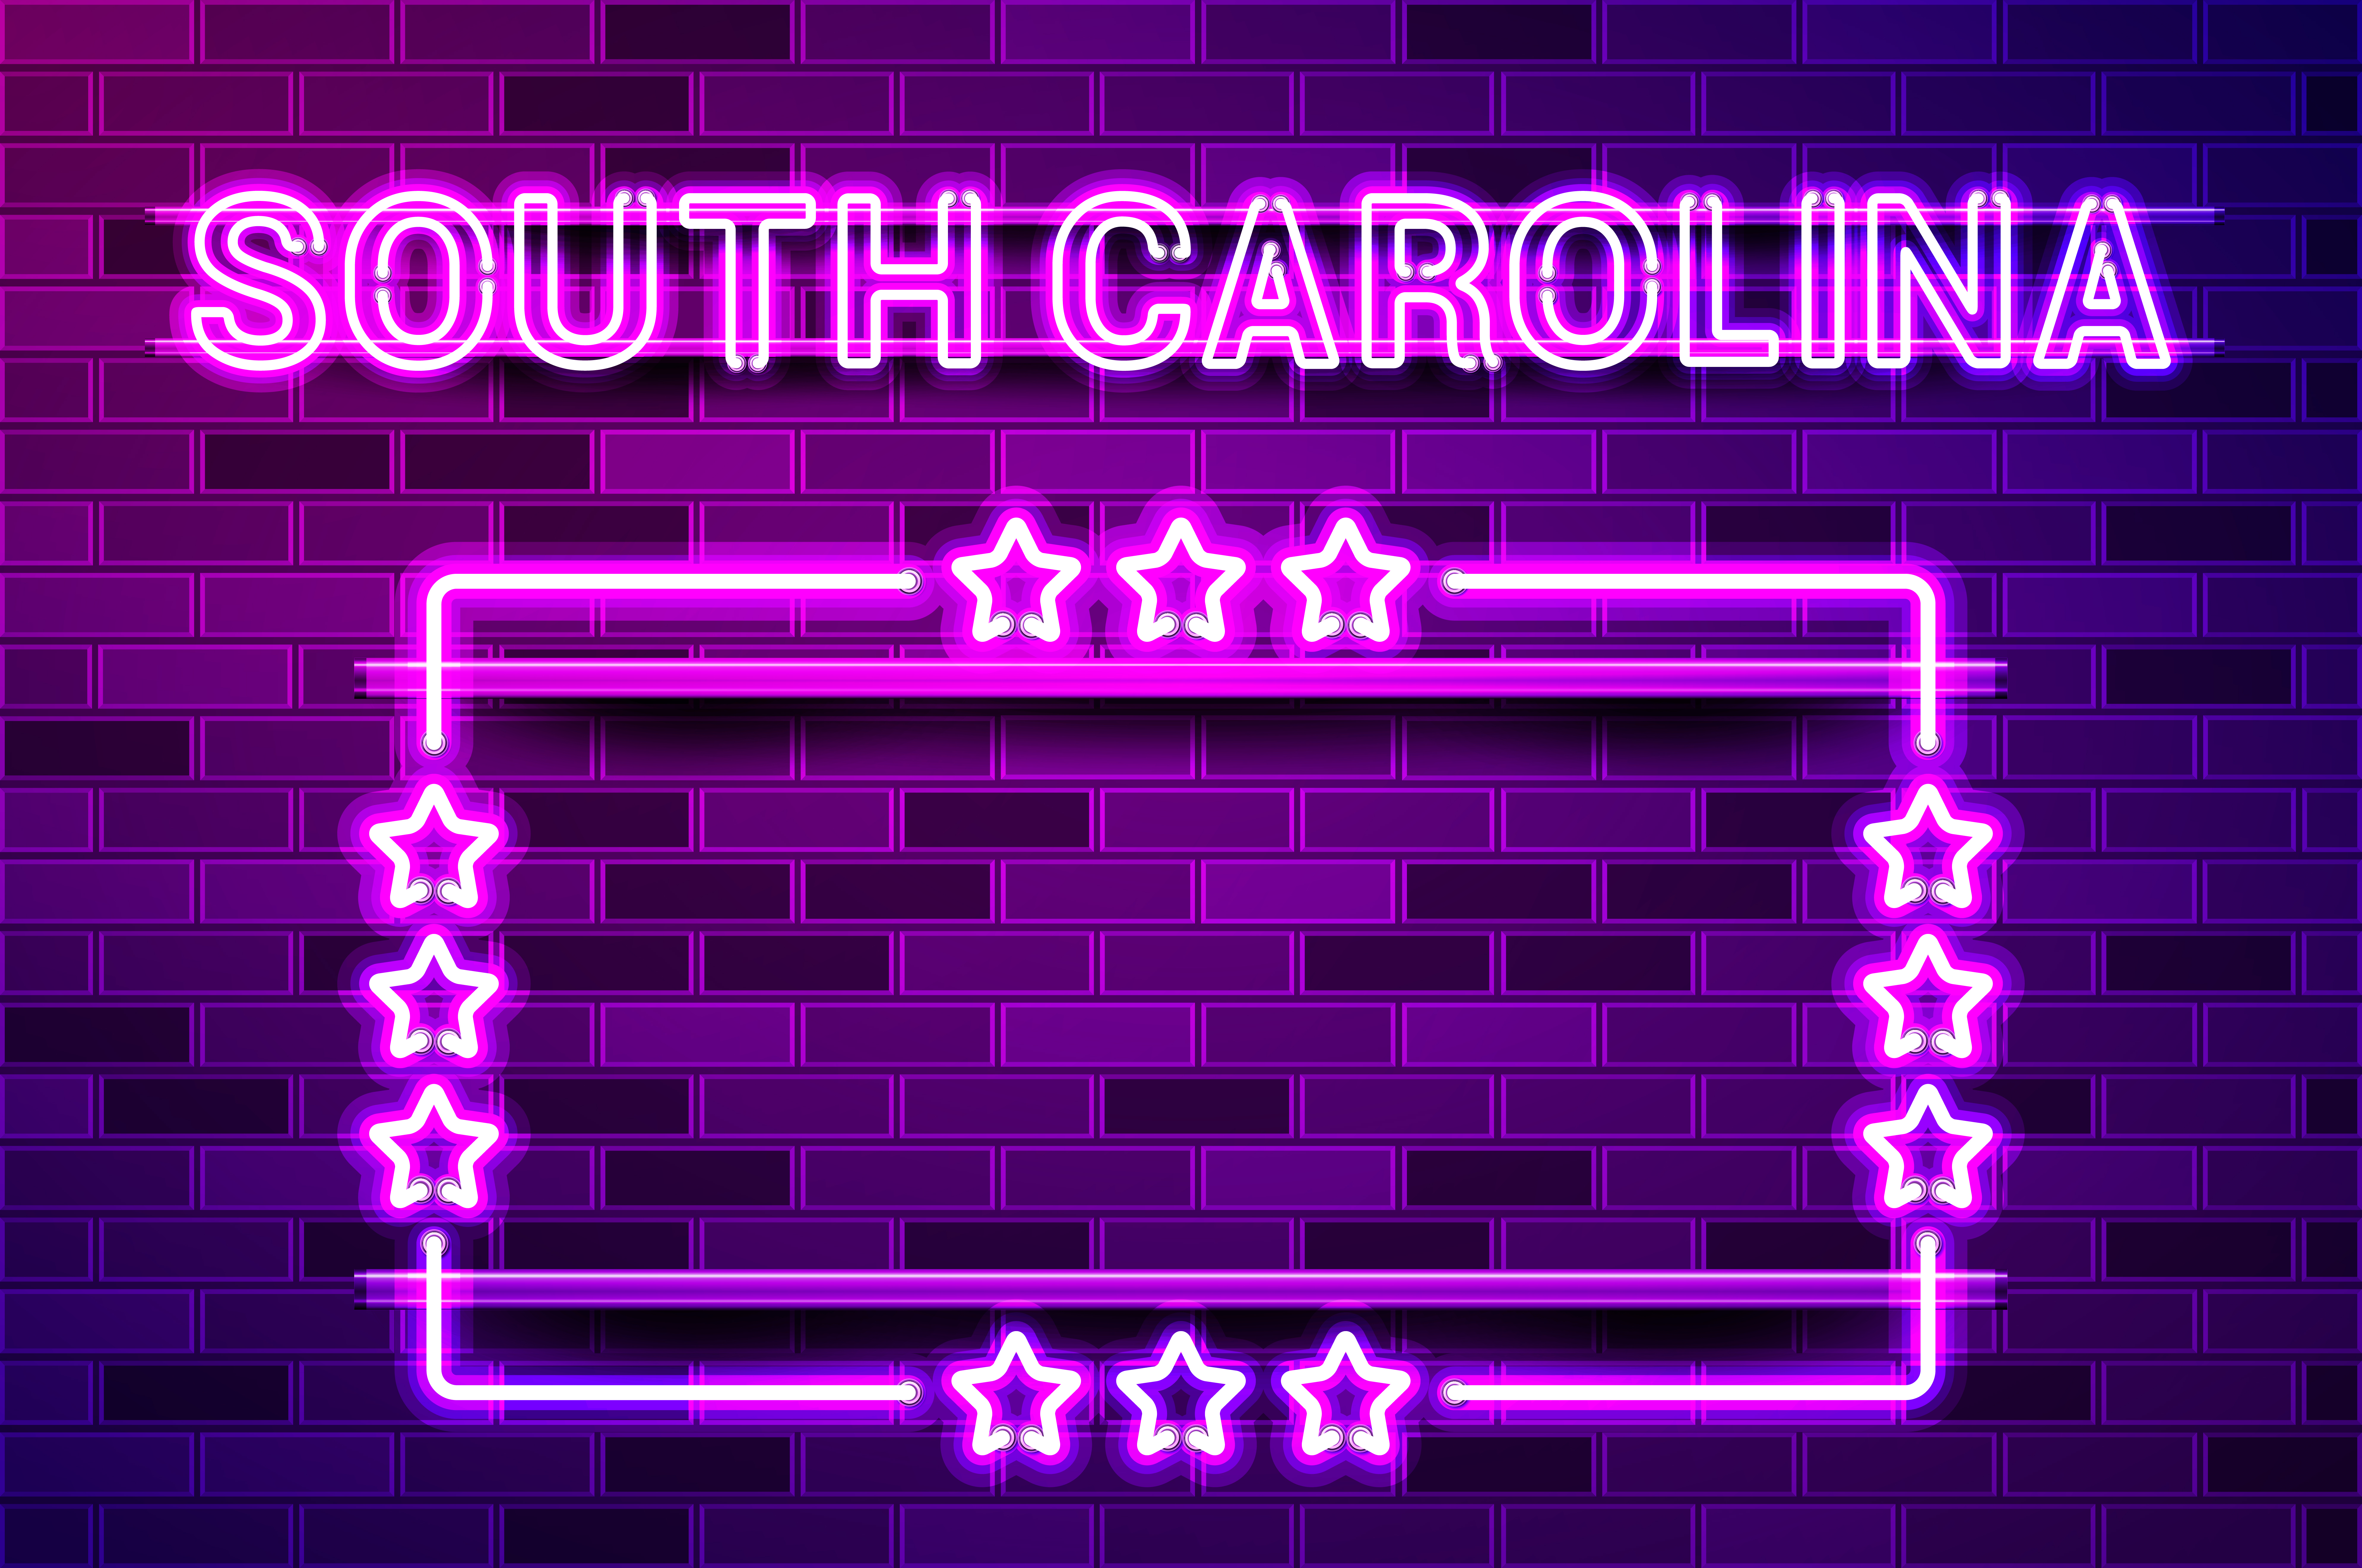 South Carolina US State glowing purple neon lettering and a rectangular frame with stars. Realistic vector illustration. Purple brick wall, violet glow, metal holders.. South Carolina US State glowing purple neon lettering and a rectangular frame with stars